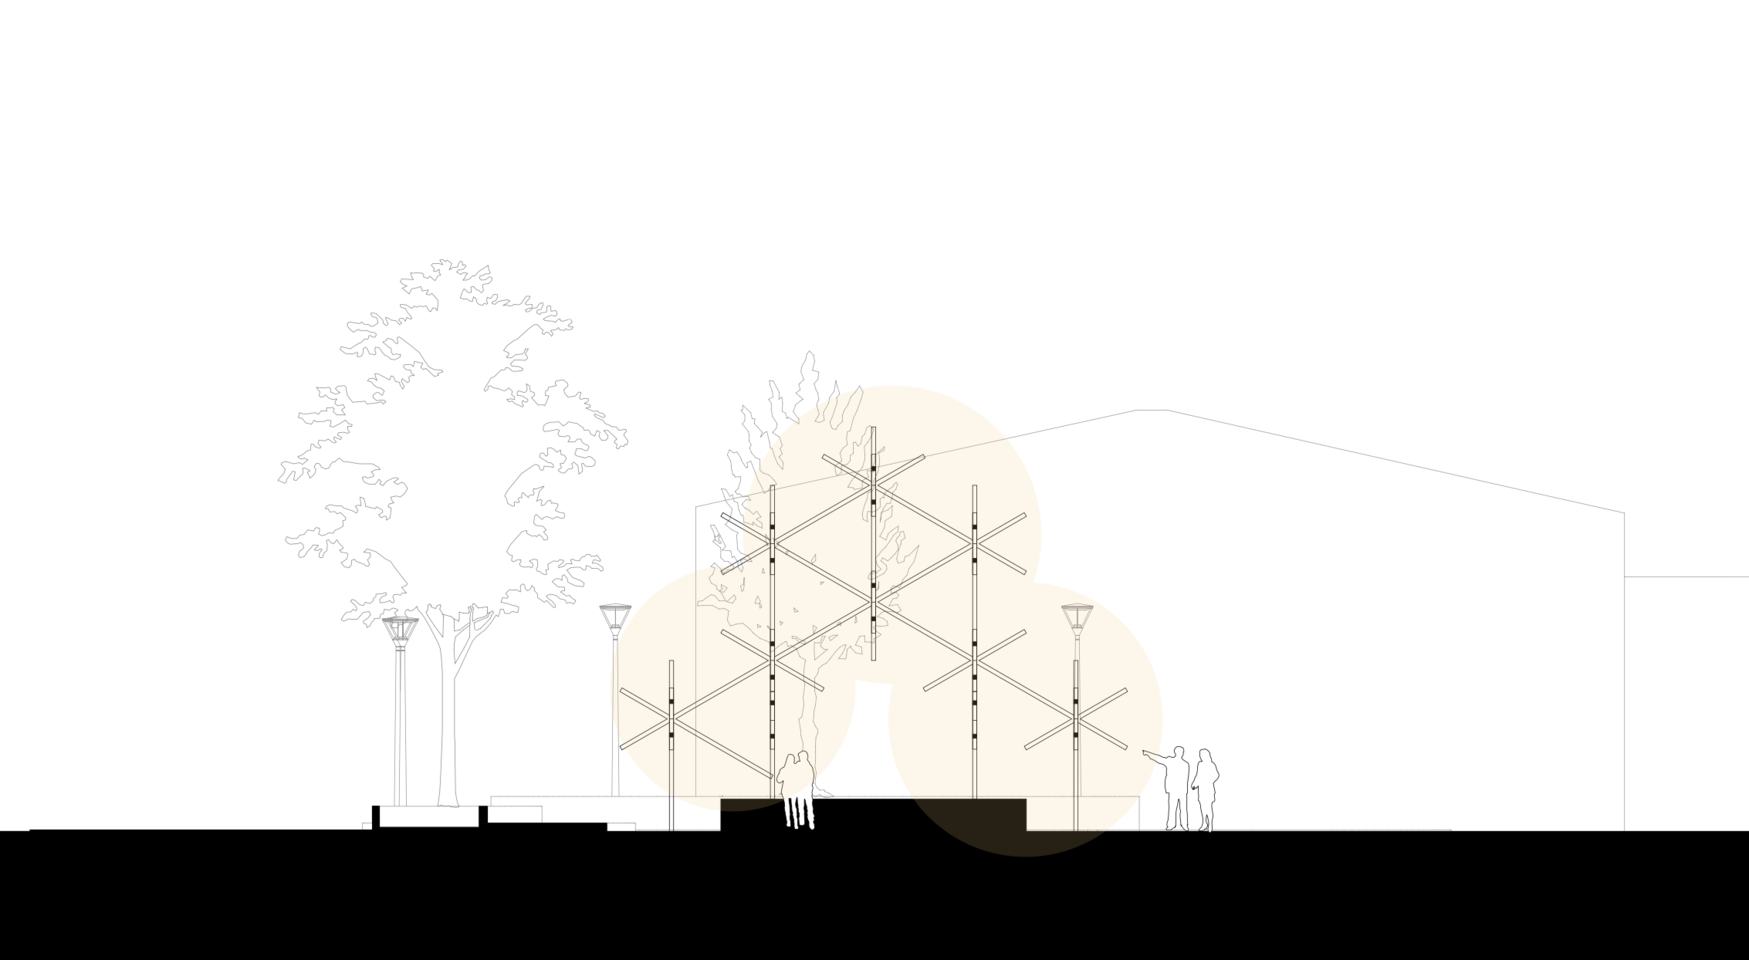 Elevation drawing of the Lumilyhty proposal, showing its crystalline design